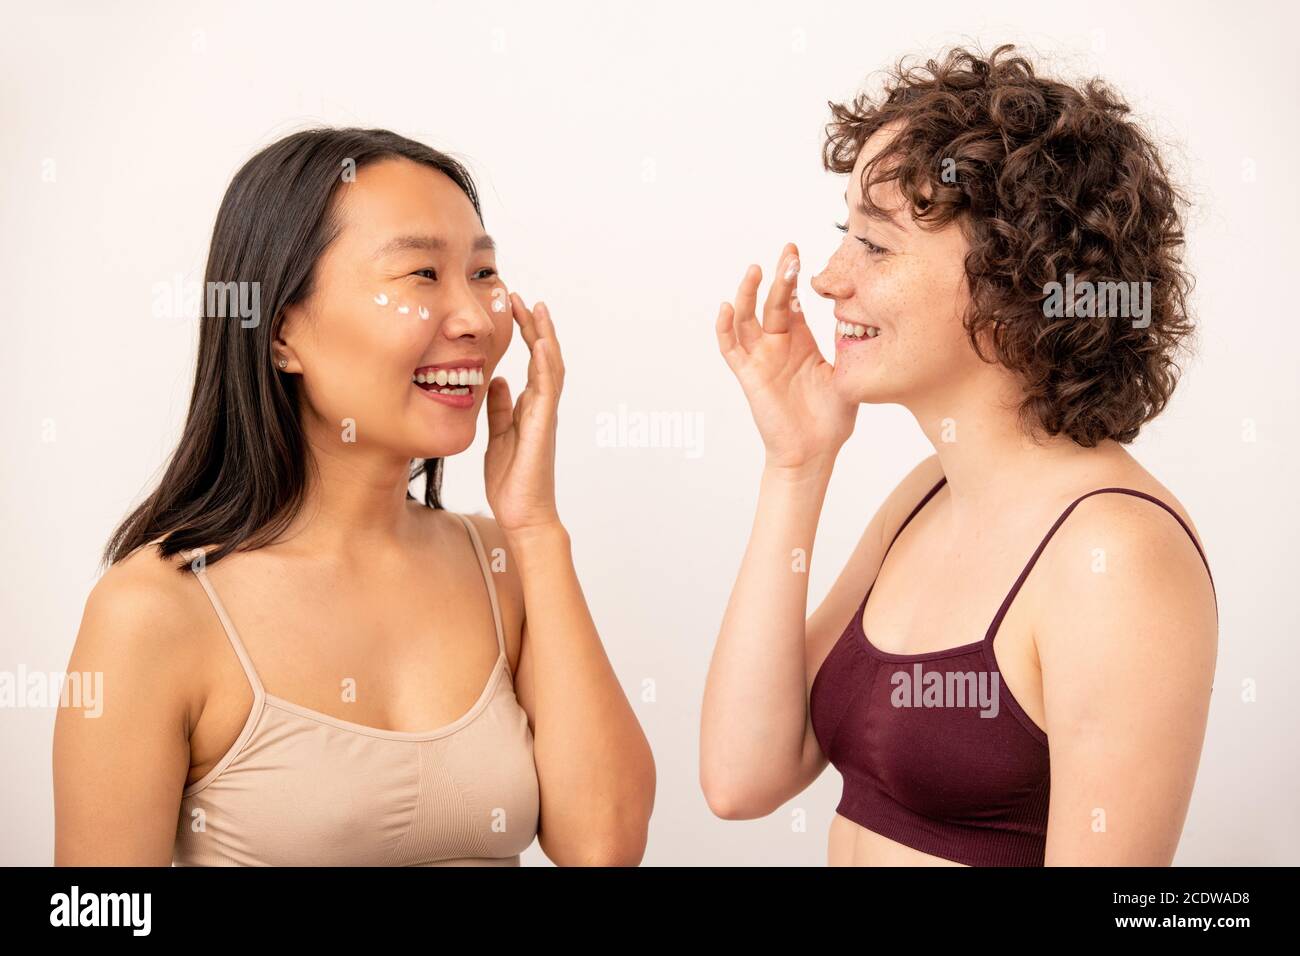 Two young laughing intercultural females in tanktops applying rejuvenating cream Stock Photo